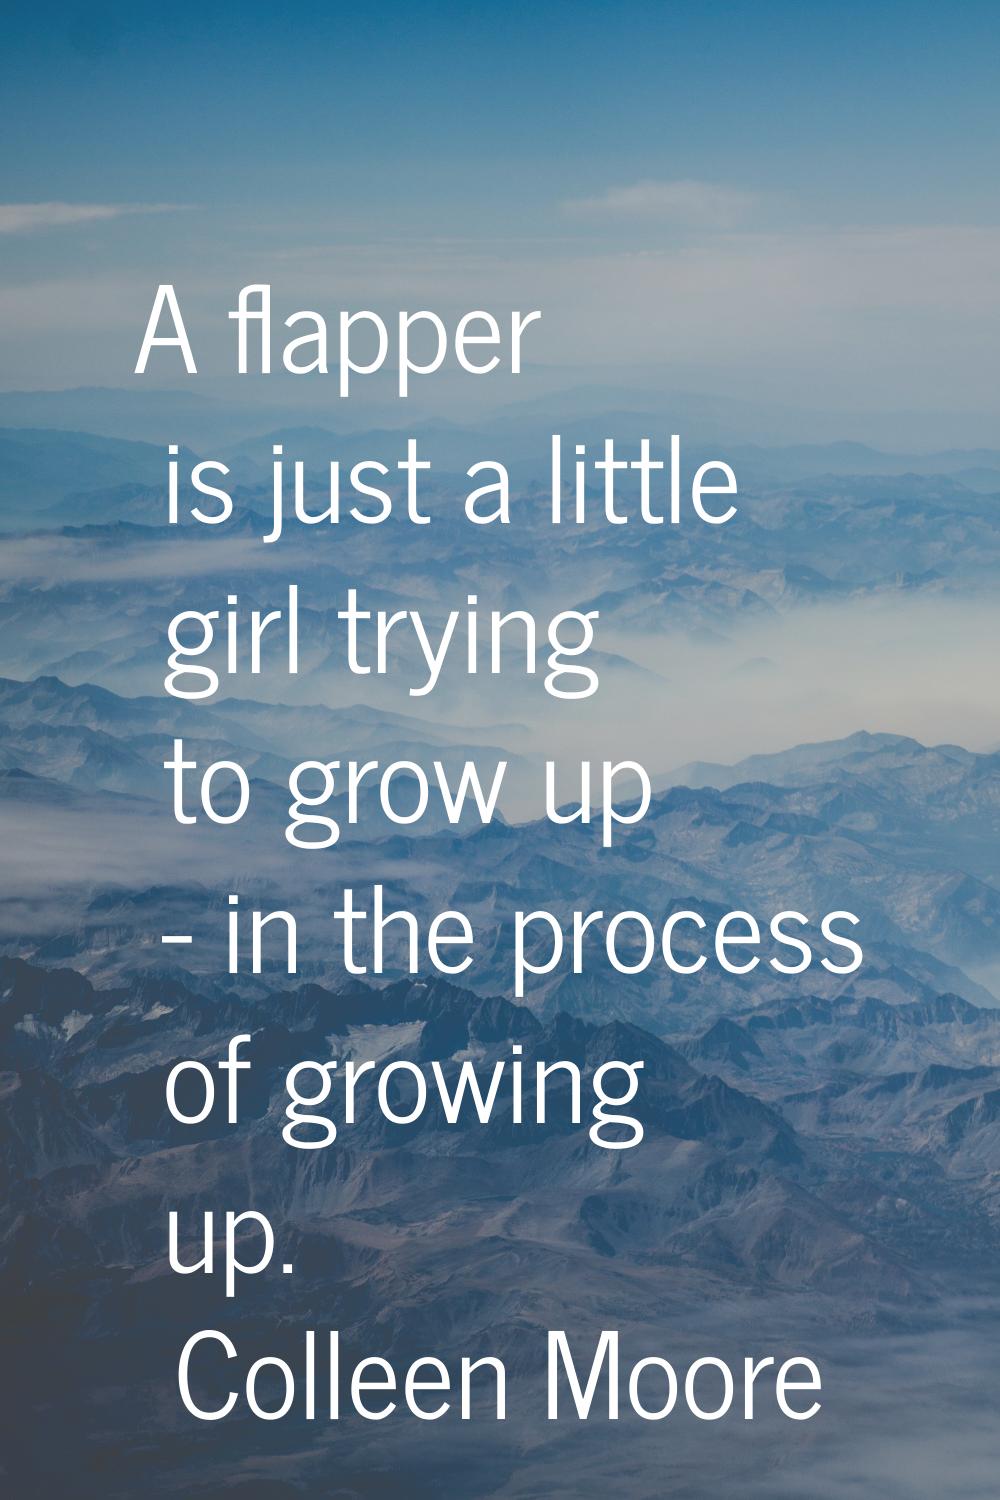 A flapper is just a little girl trying to grow up - in the process of growing up.